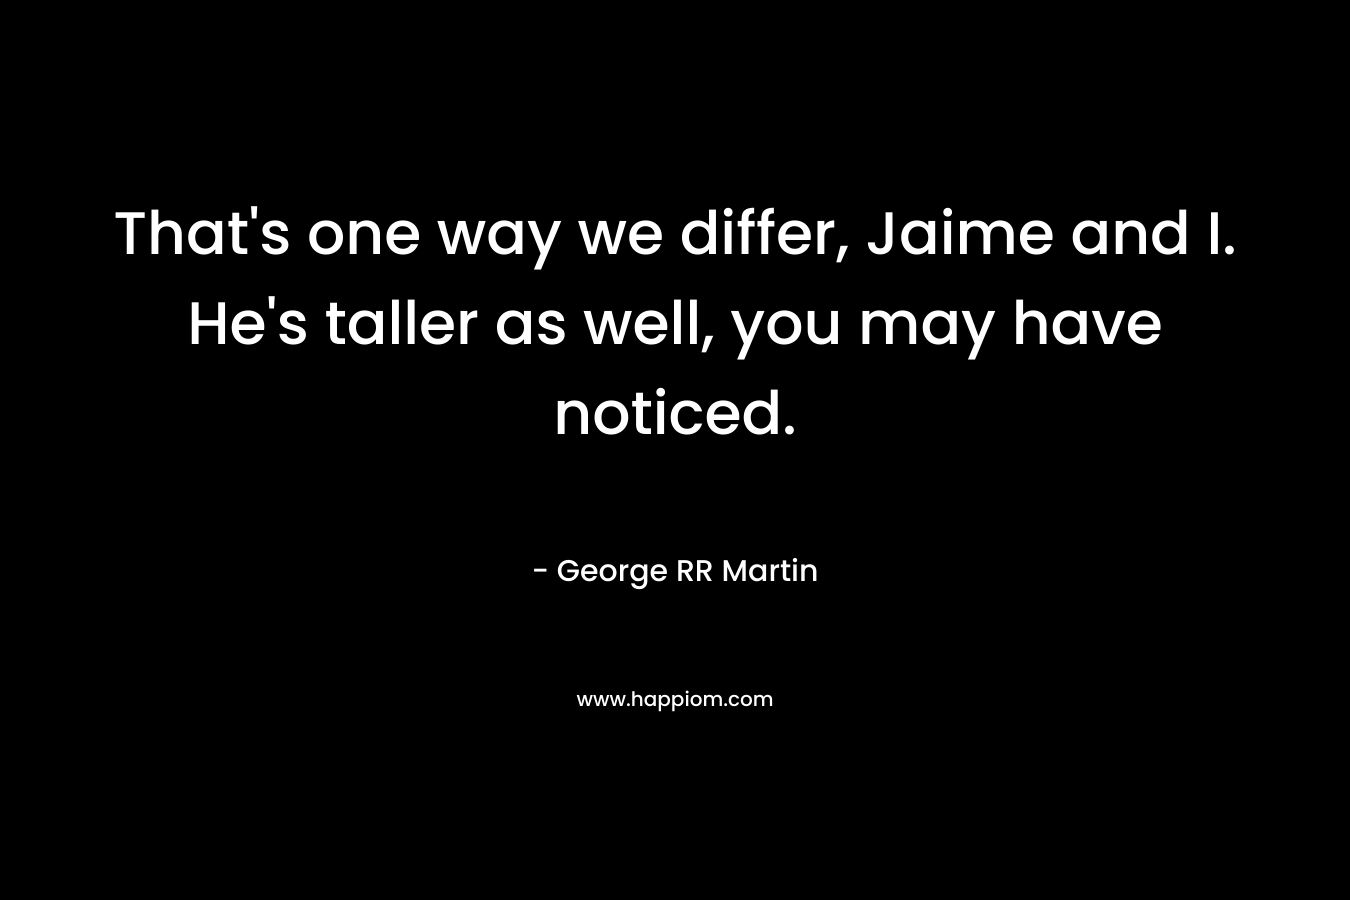 That’s one way we differ, Jaime and I. He’s taller as well, you may have noticed. – George RR Martin